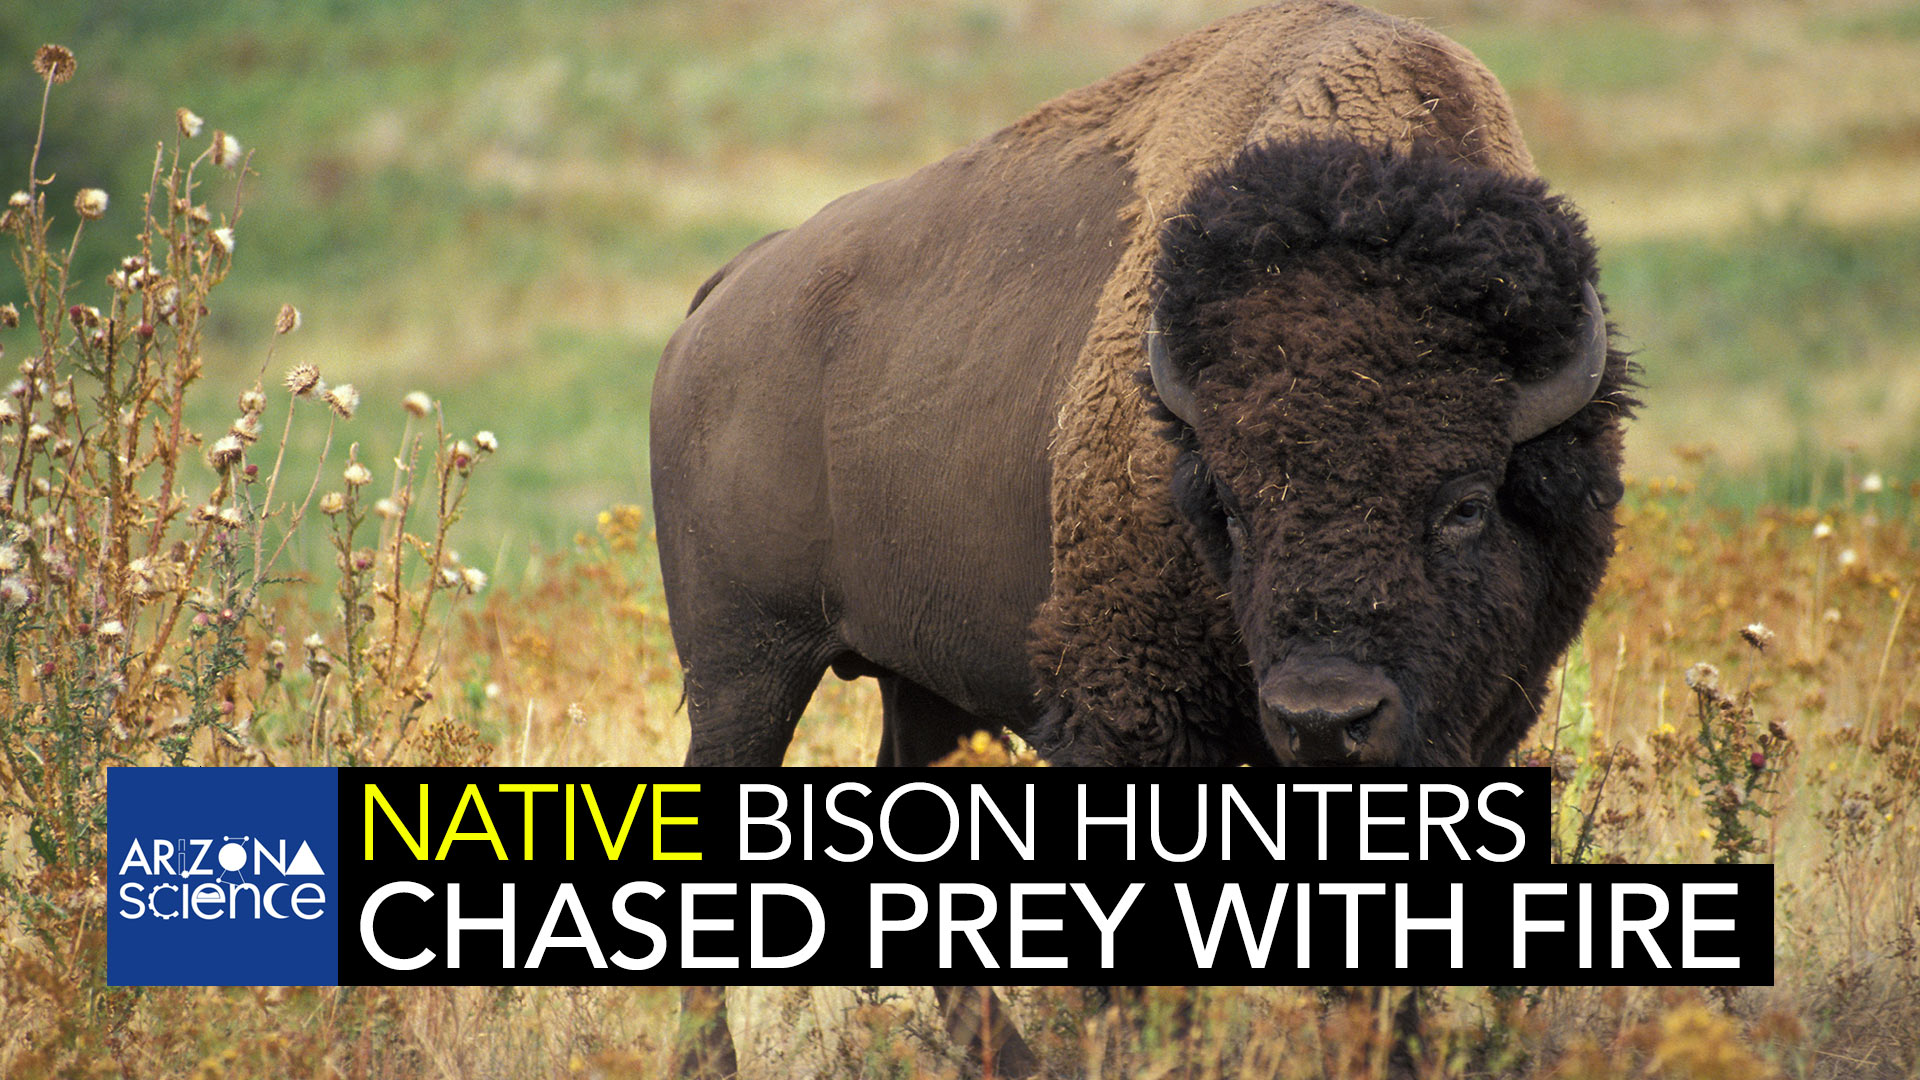 New discoveries revealed that ancient Native American hunters would manage wild herds of bison for food.